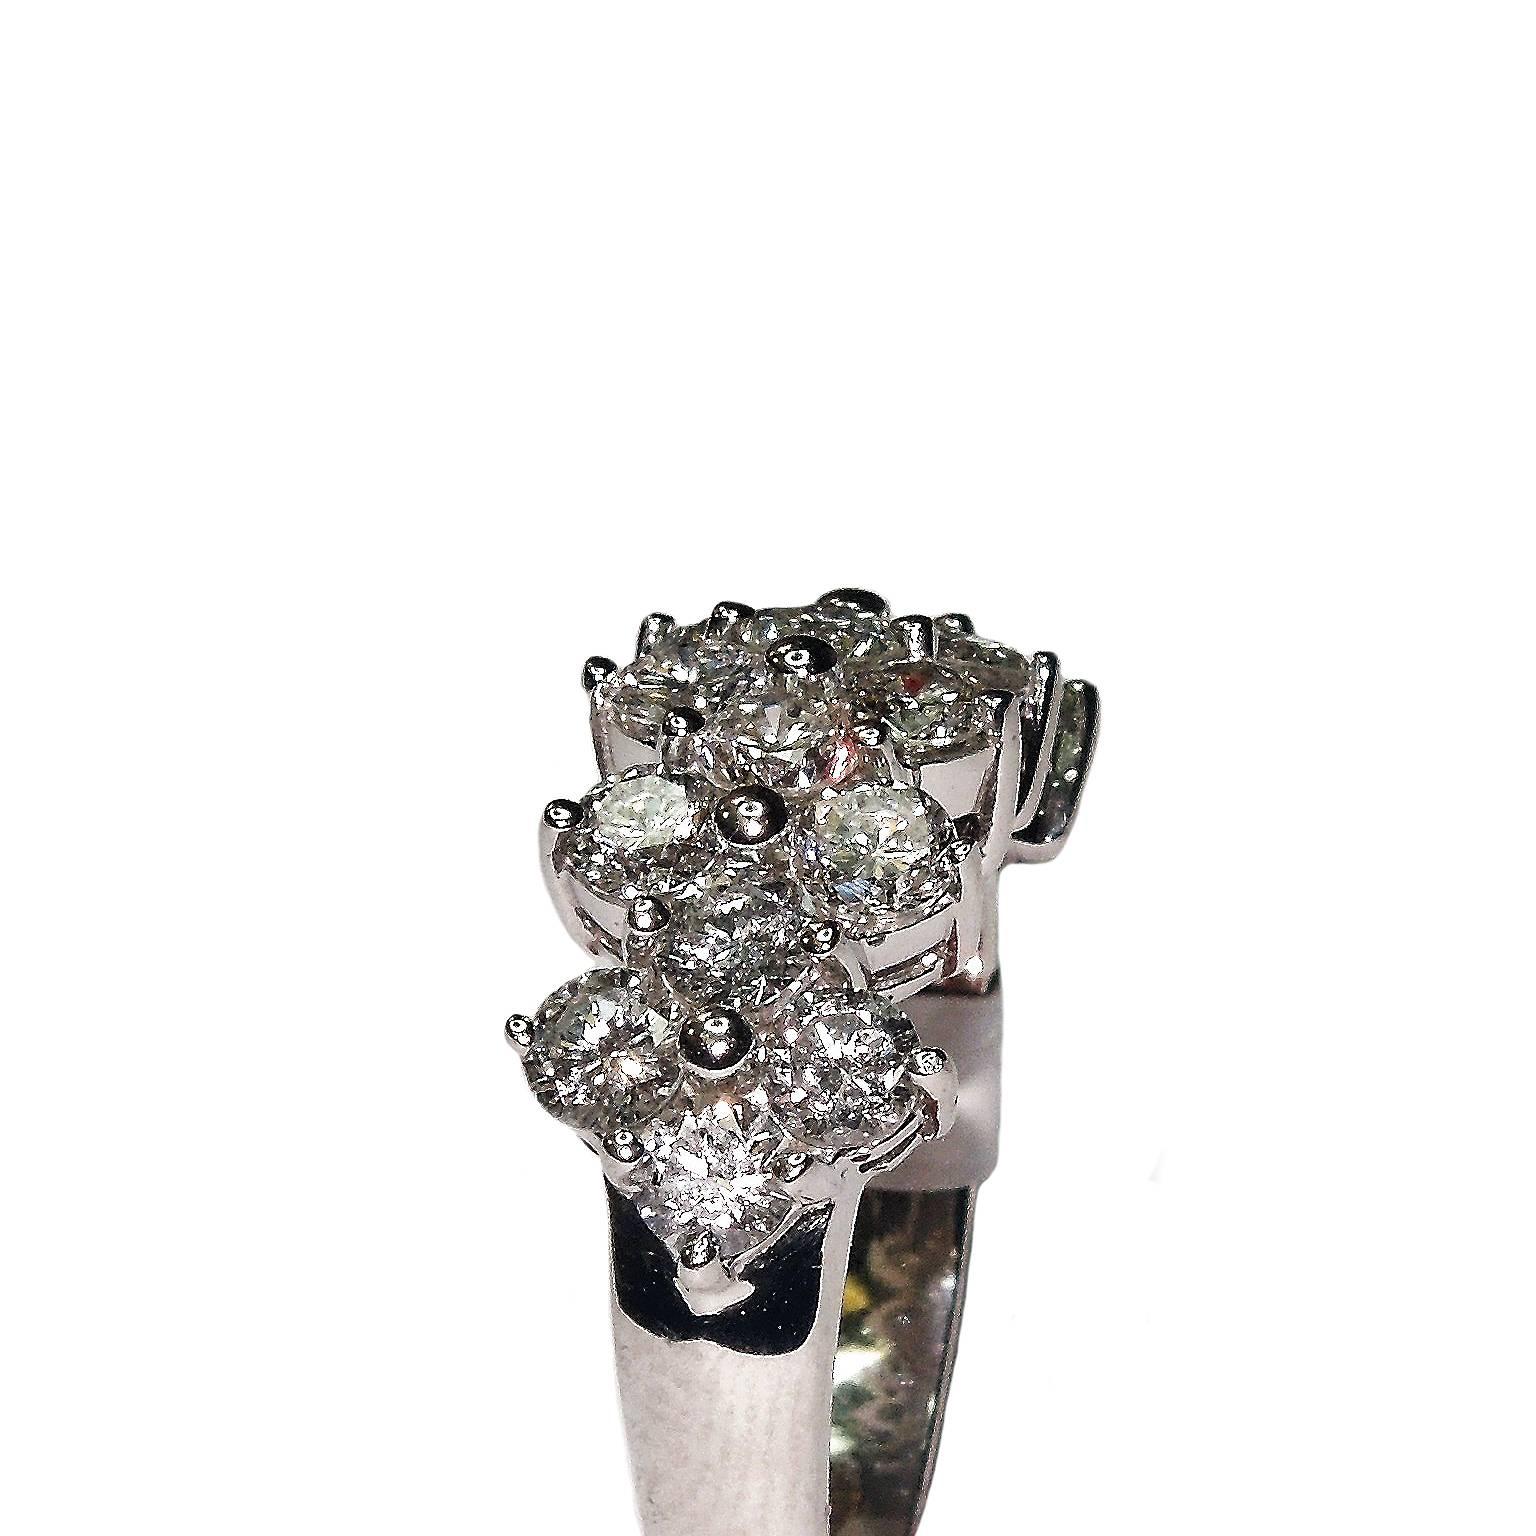 14K White Gold Ring with Diamonds

Apprx. 3.20ct. H Color, SI1 Diamonds

0.4 inches width

Currently size 6 but can be sized.

Estate

